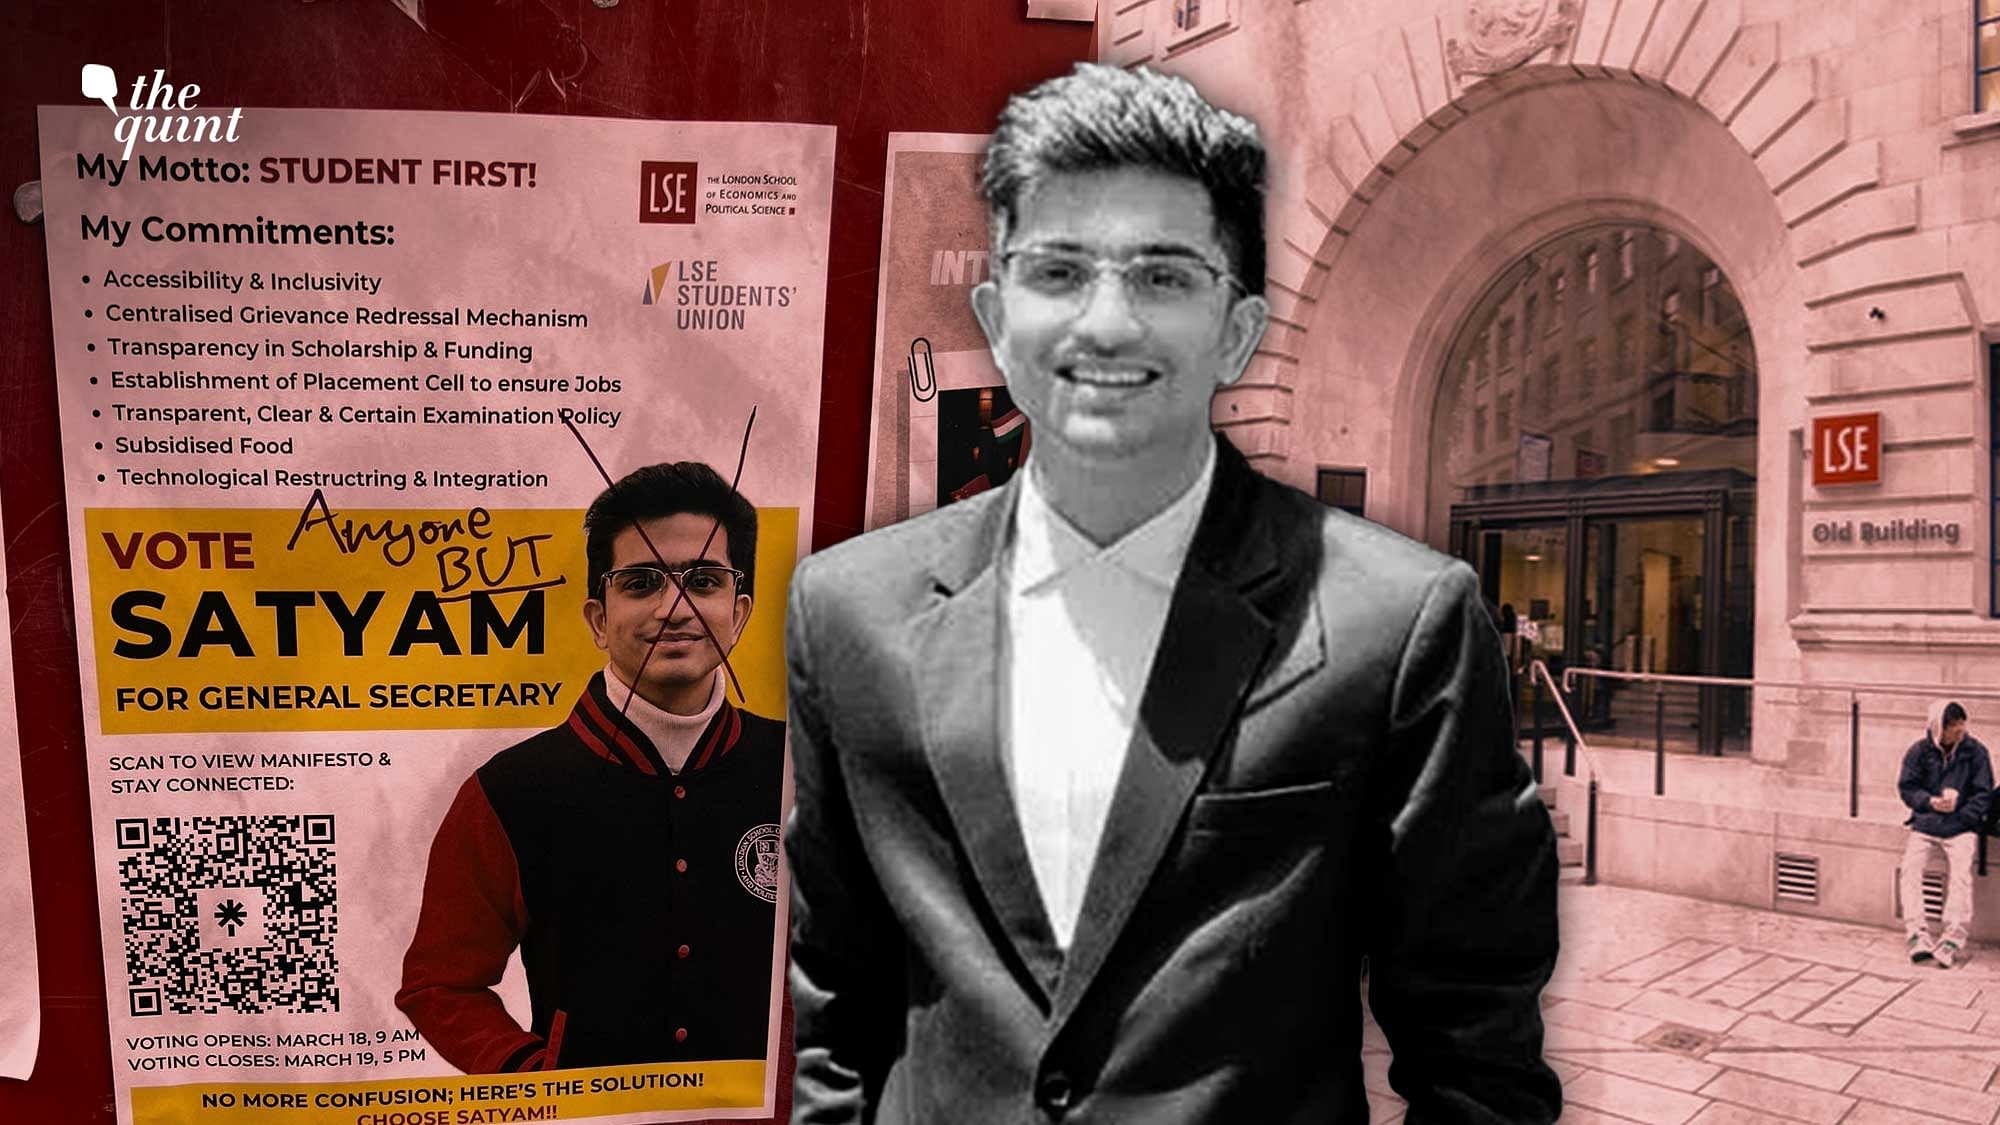 <div class="paragraphs"><p>Satyam Surana, a Master's student at the prestigious London School of Economics (LSE), claims that a "well-planned hate campaign" was initiated against him after he decided to run for the post of general secretary in the LSE Student Union elections.</p></div>